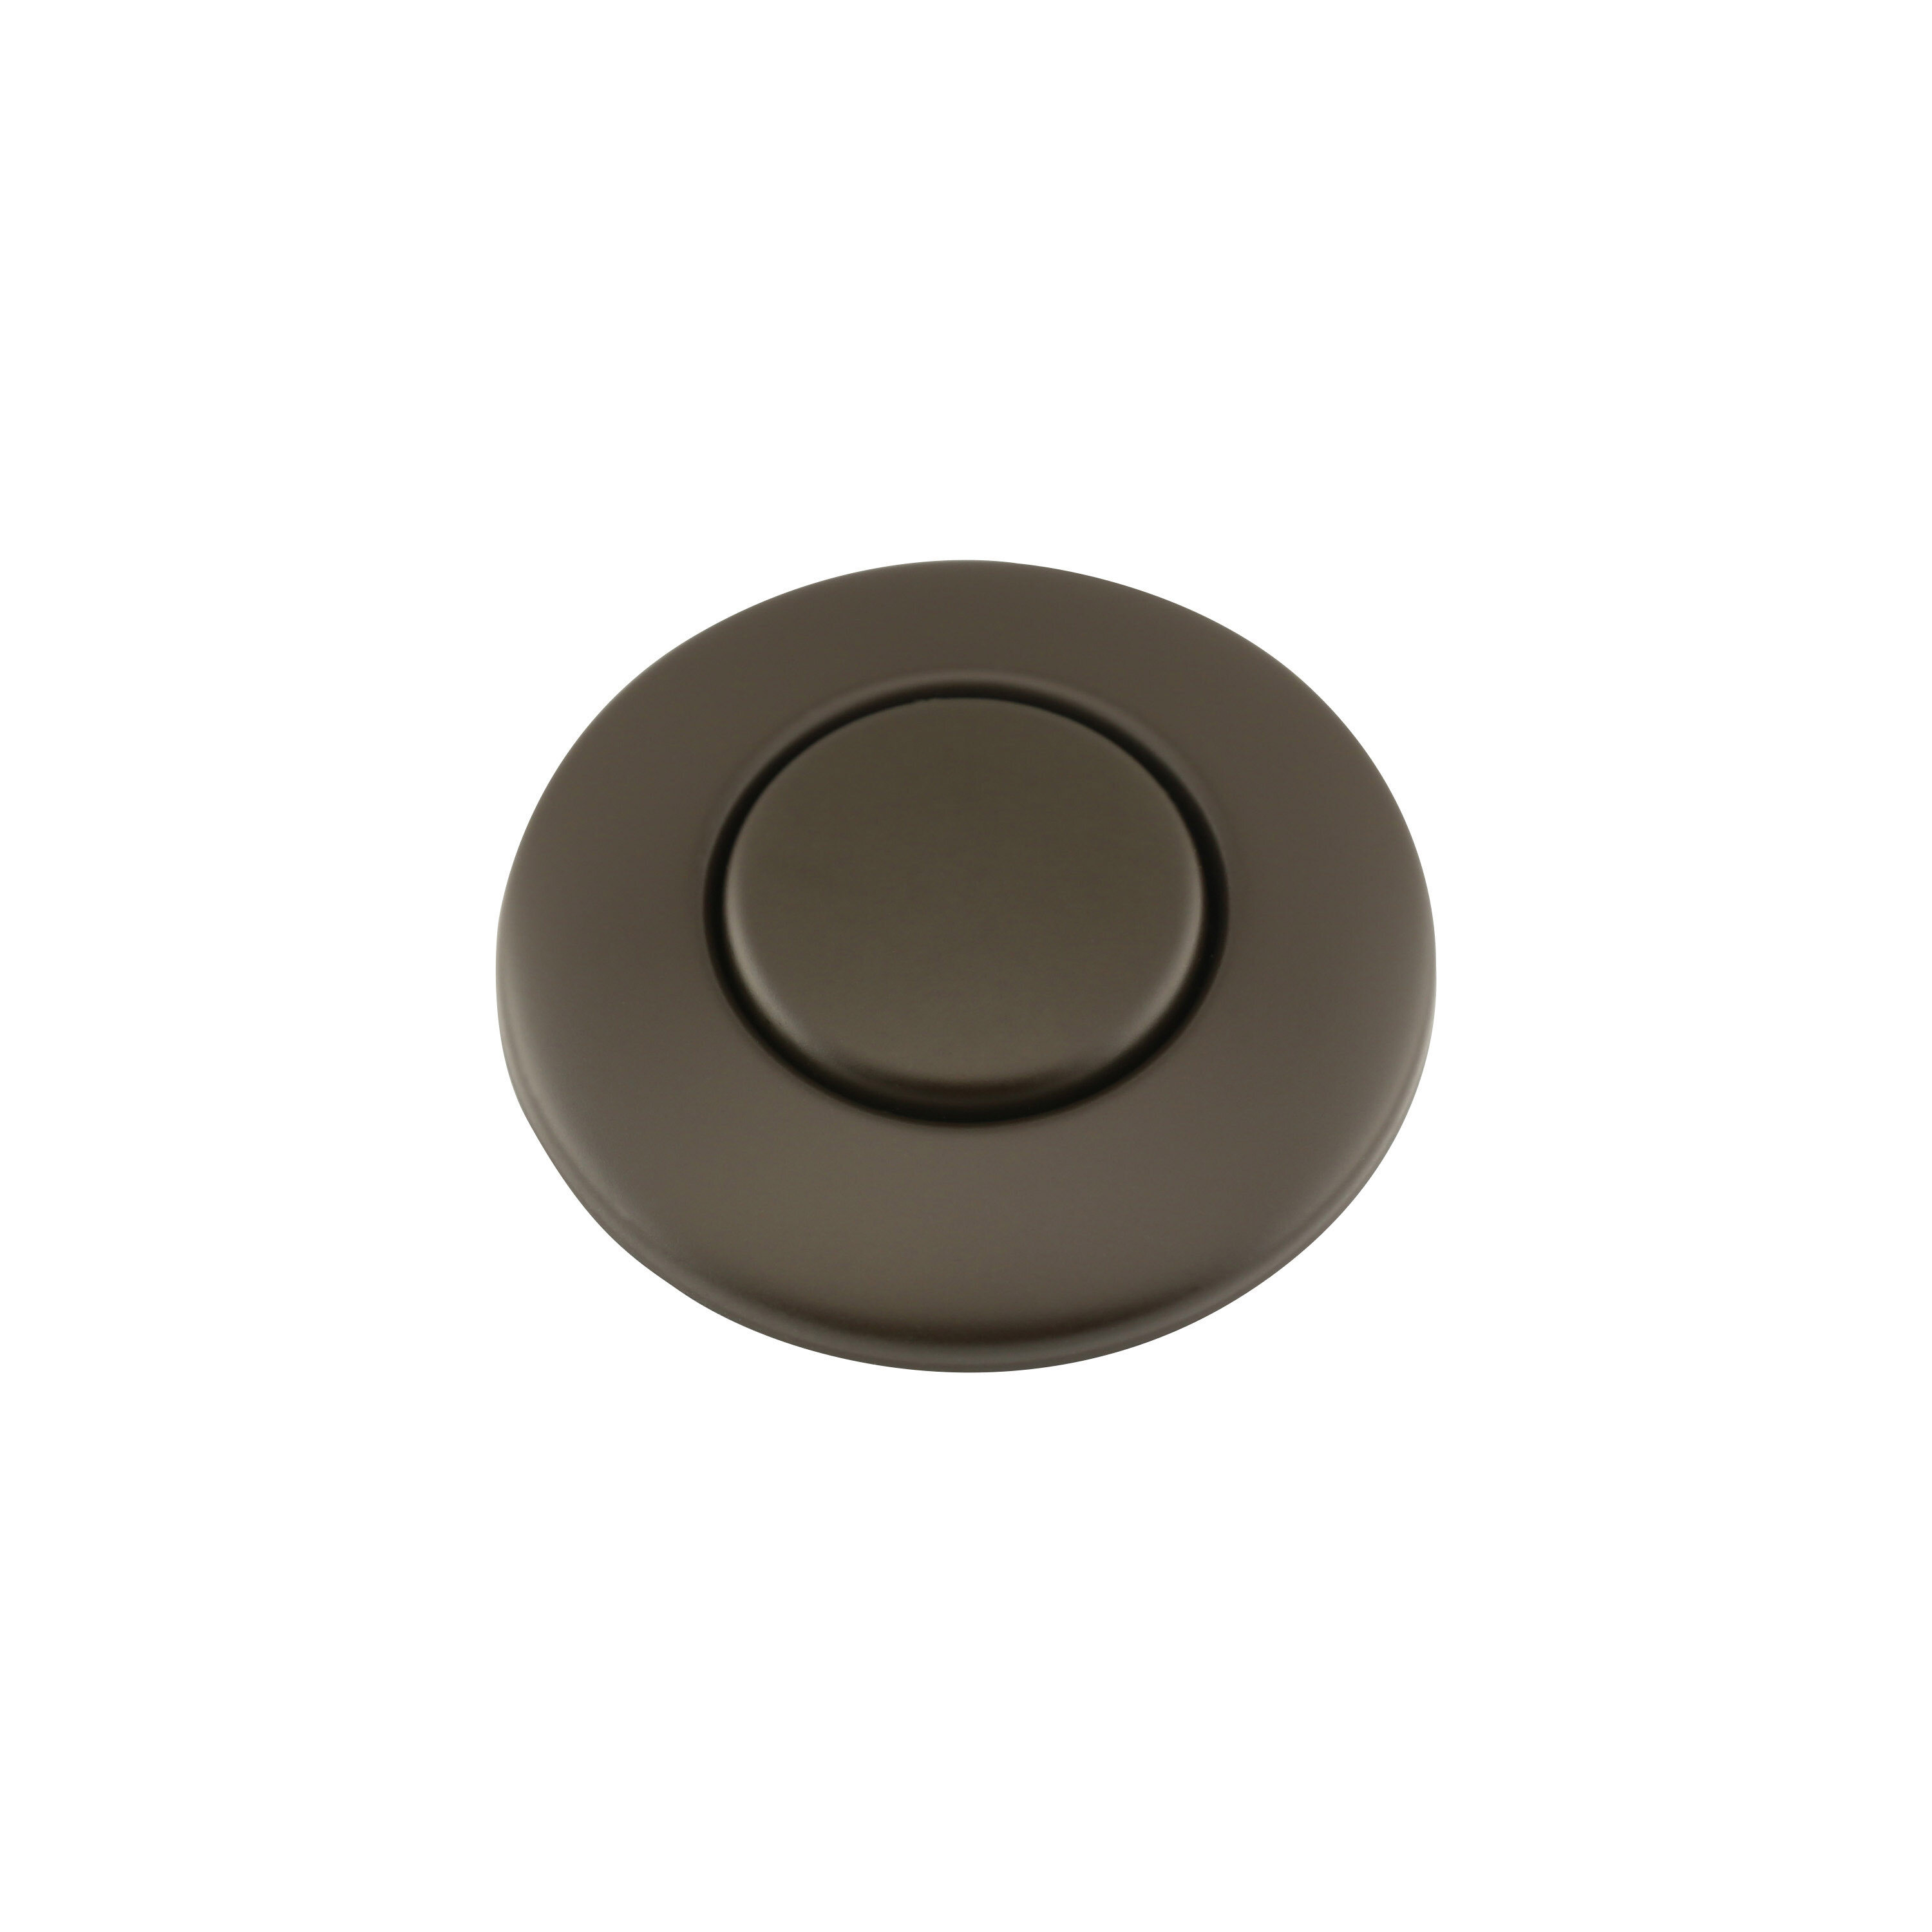 InSinkErator Sink-Top Air Switch Push Button in Satin Nickel for